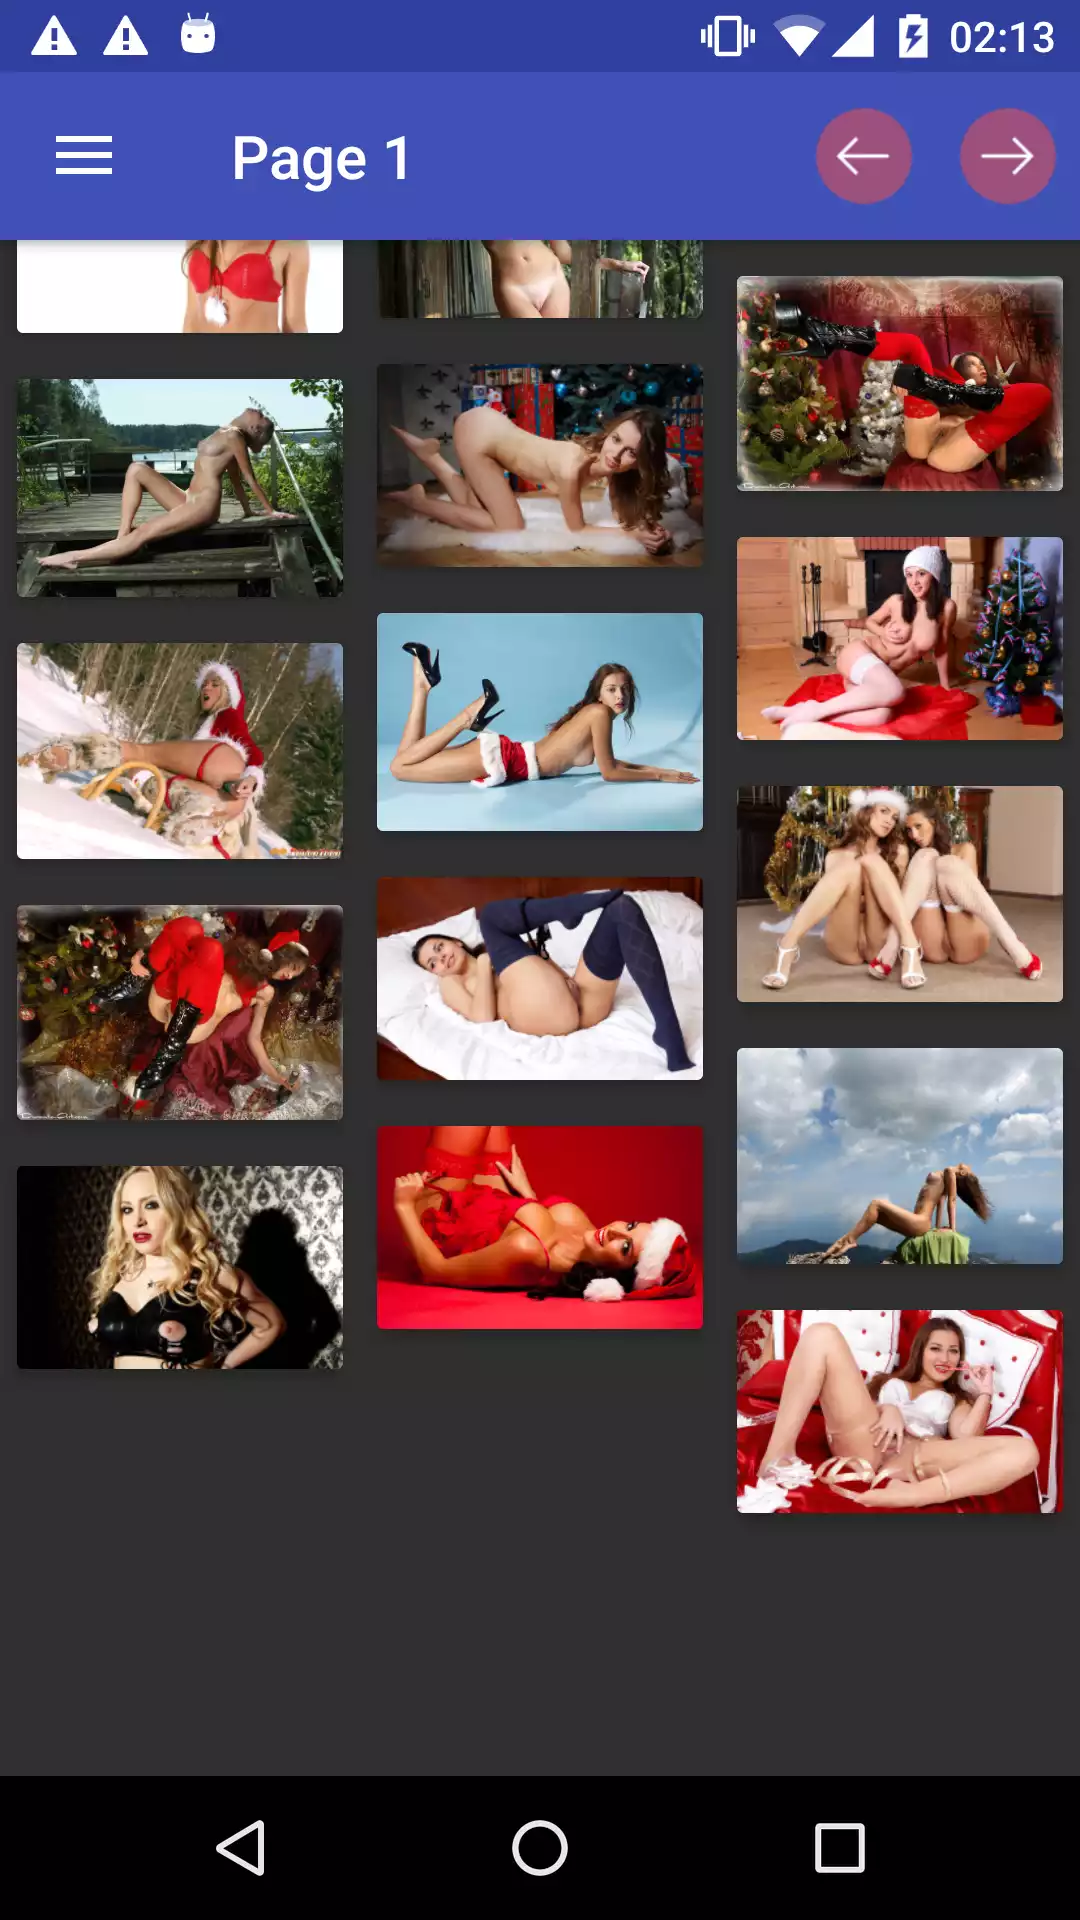 xxx-holidays apps,best,backgrounds,texas,photo,watching,porn,video,hentai,offline,app,wallpapers,pics,alexis,mature,apk,android,gallery,pornstar,pictures,sexy,photos